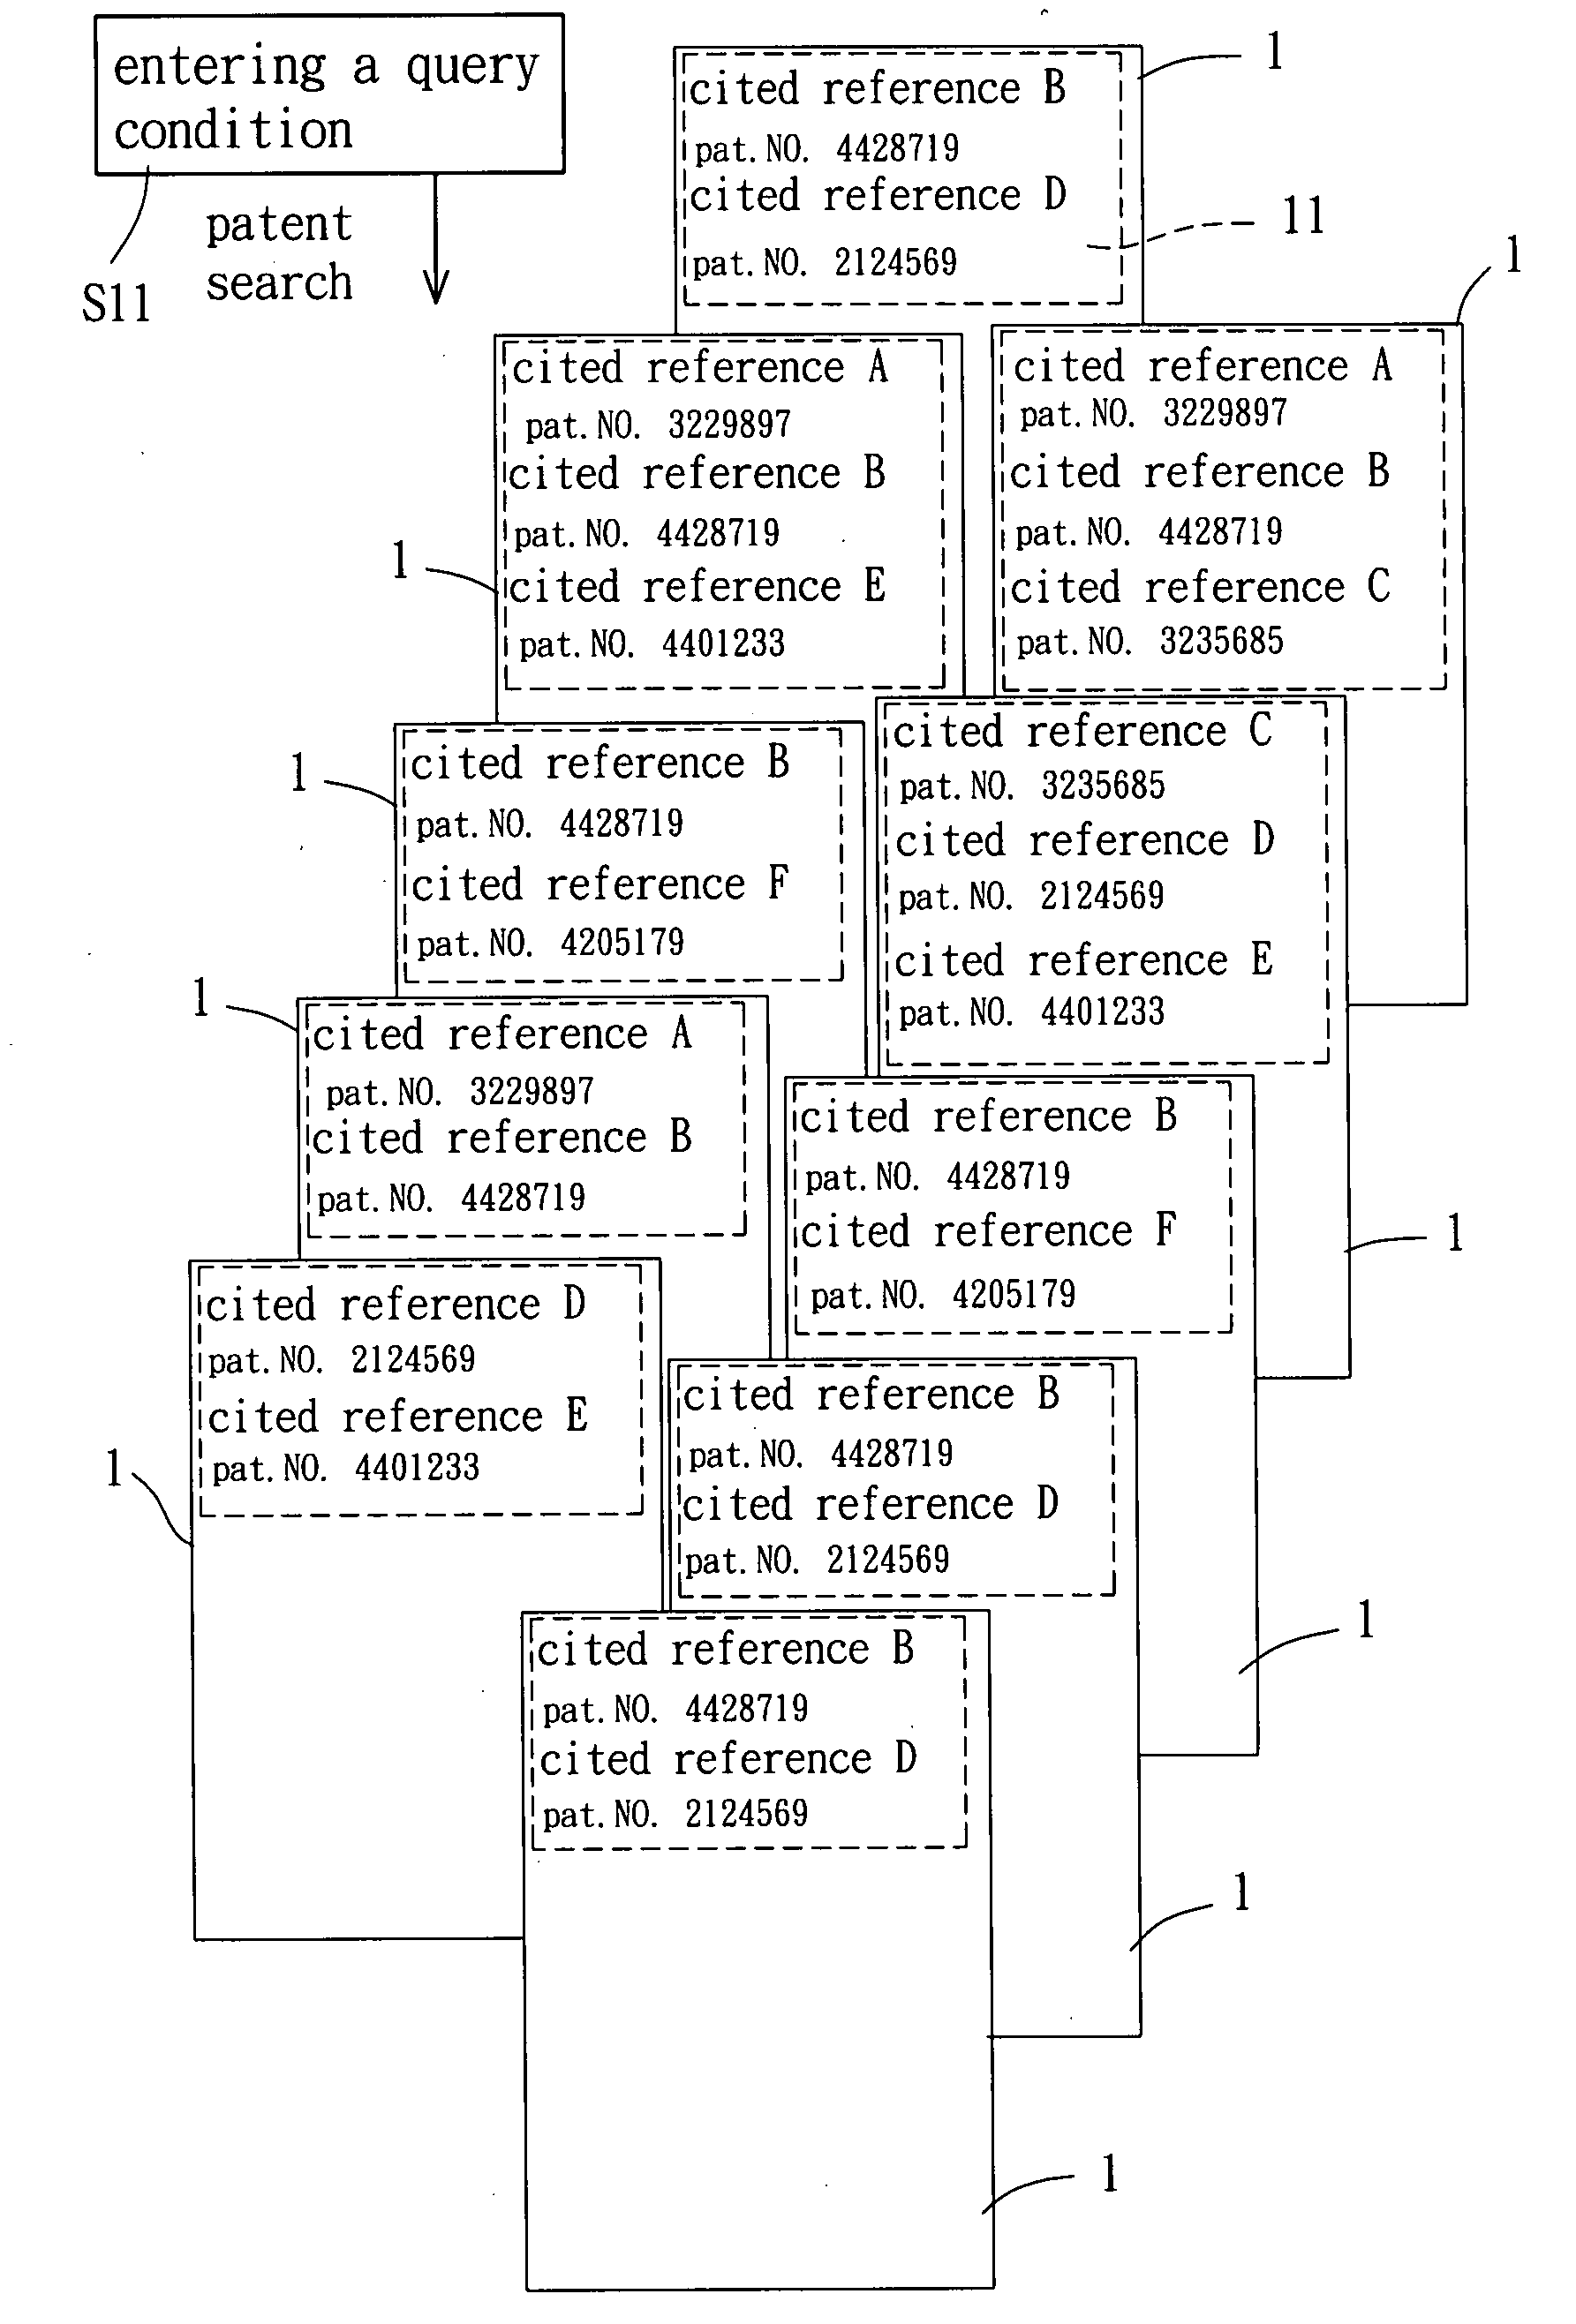 Technical correlation analysis method for evaluating patents